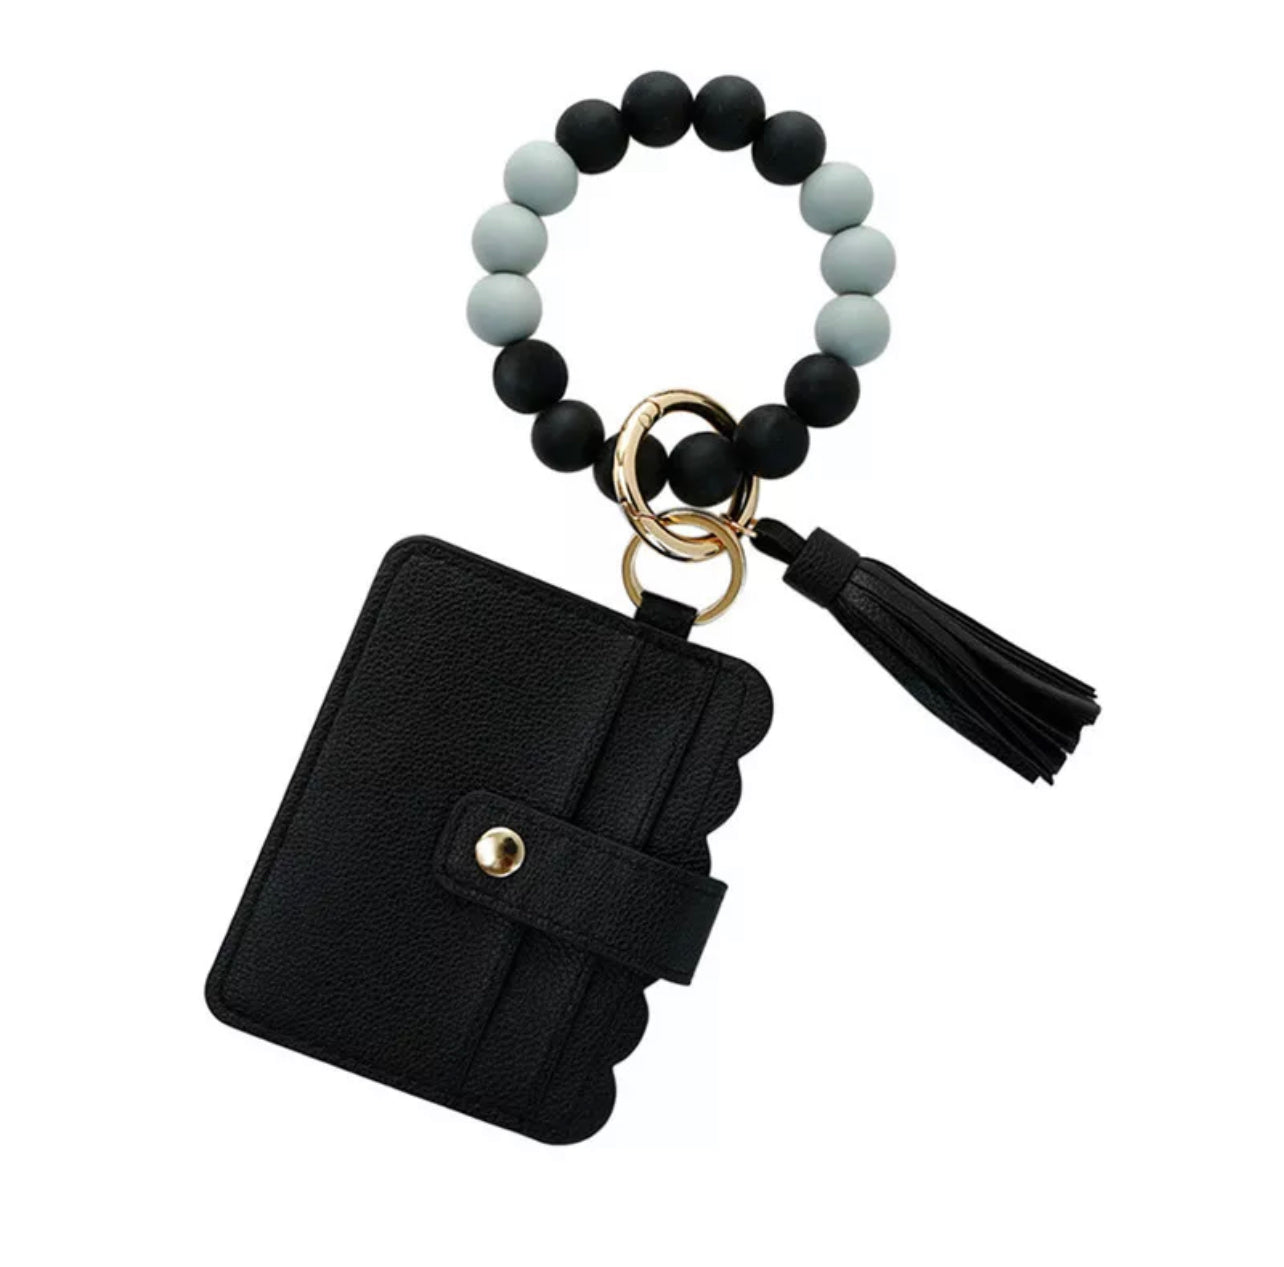 colorful silicone bracelet with black wallet and tassel attached to it.